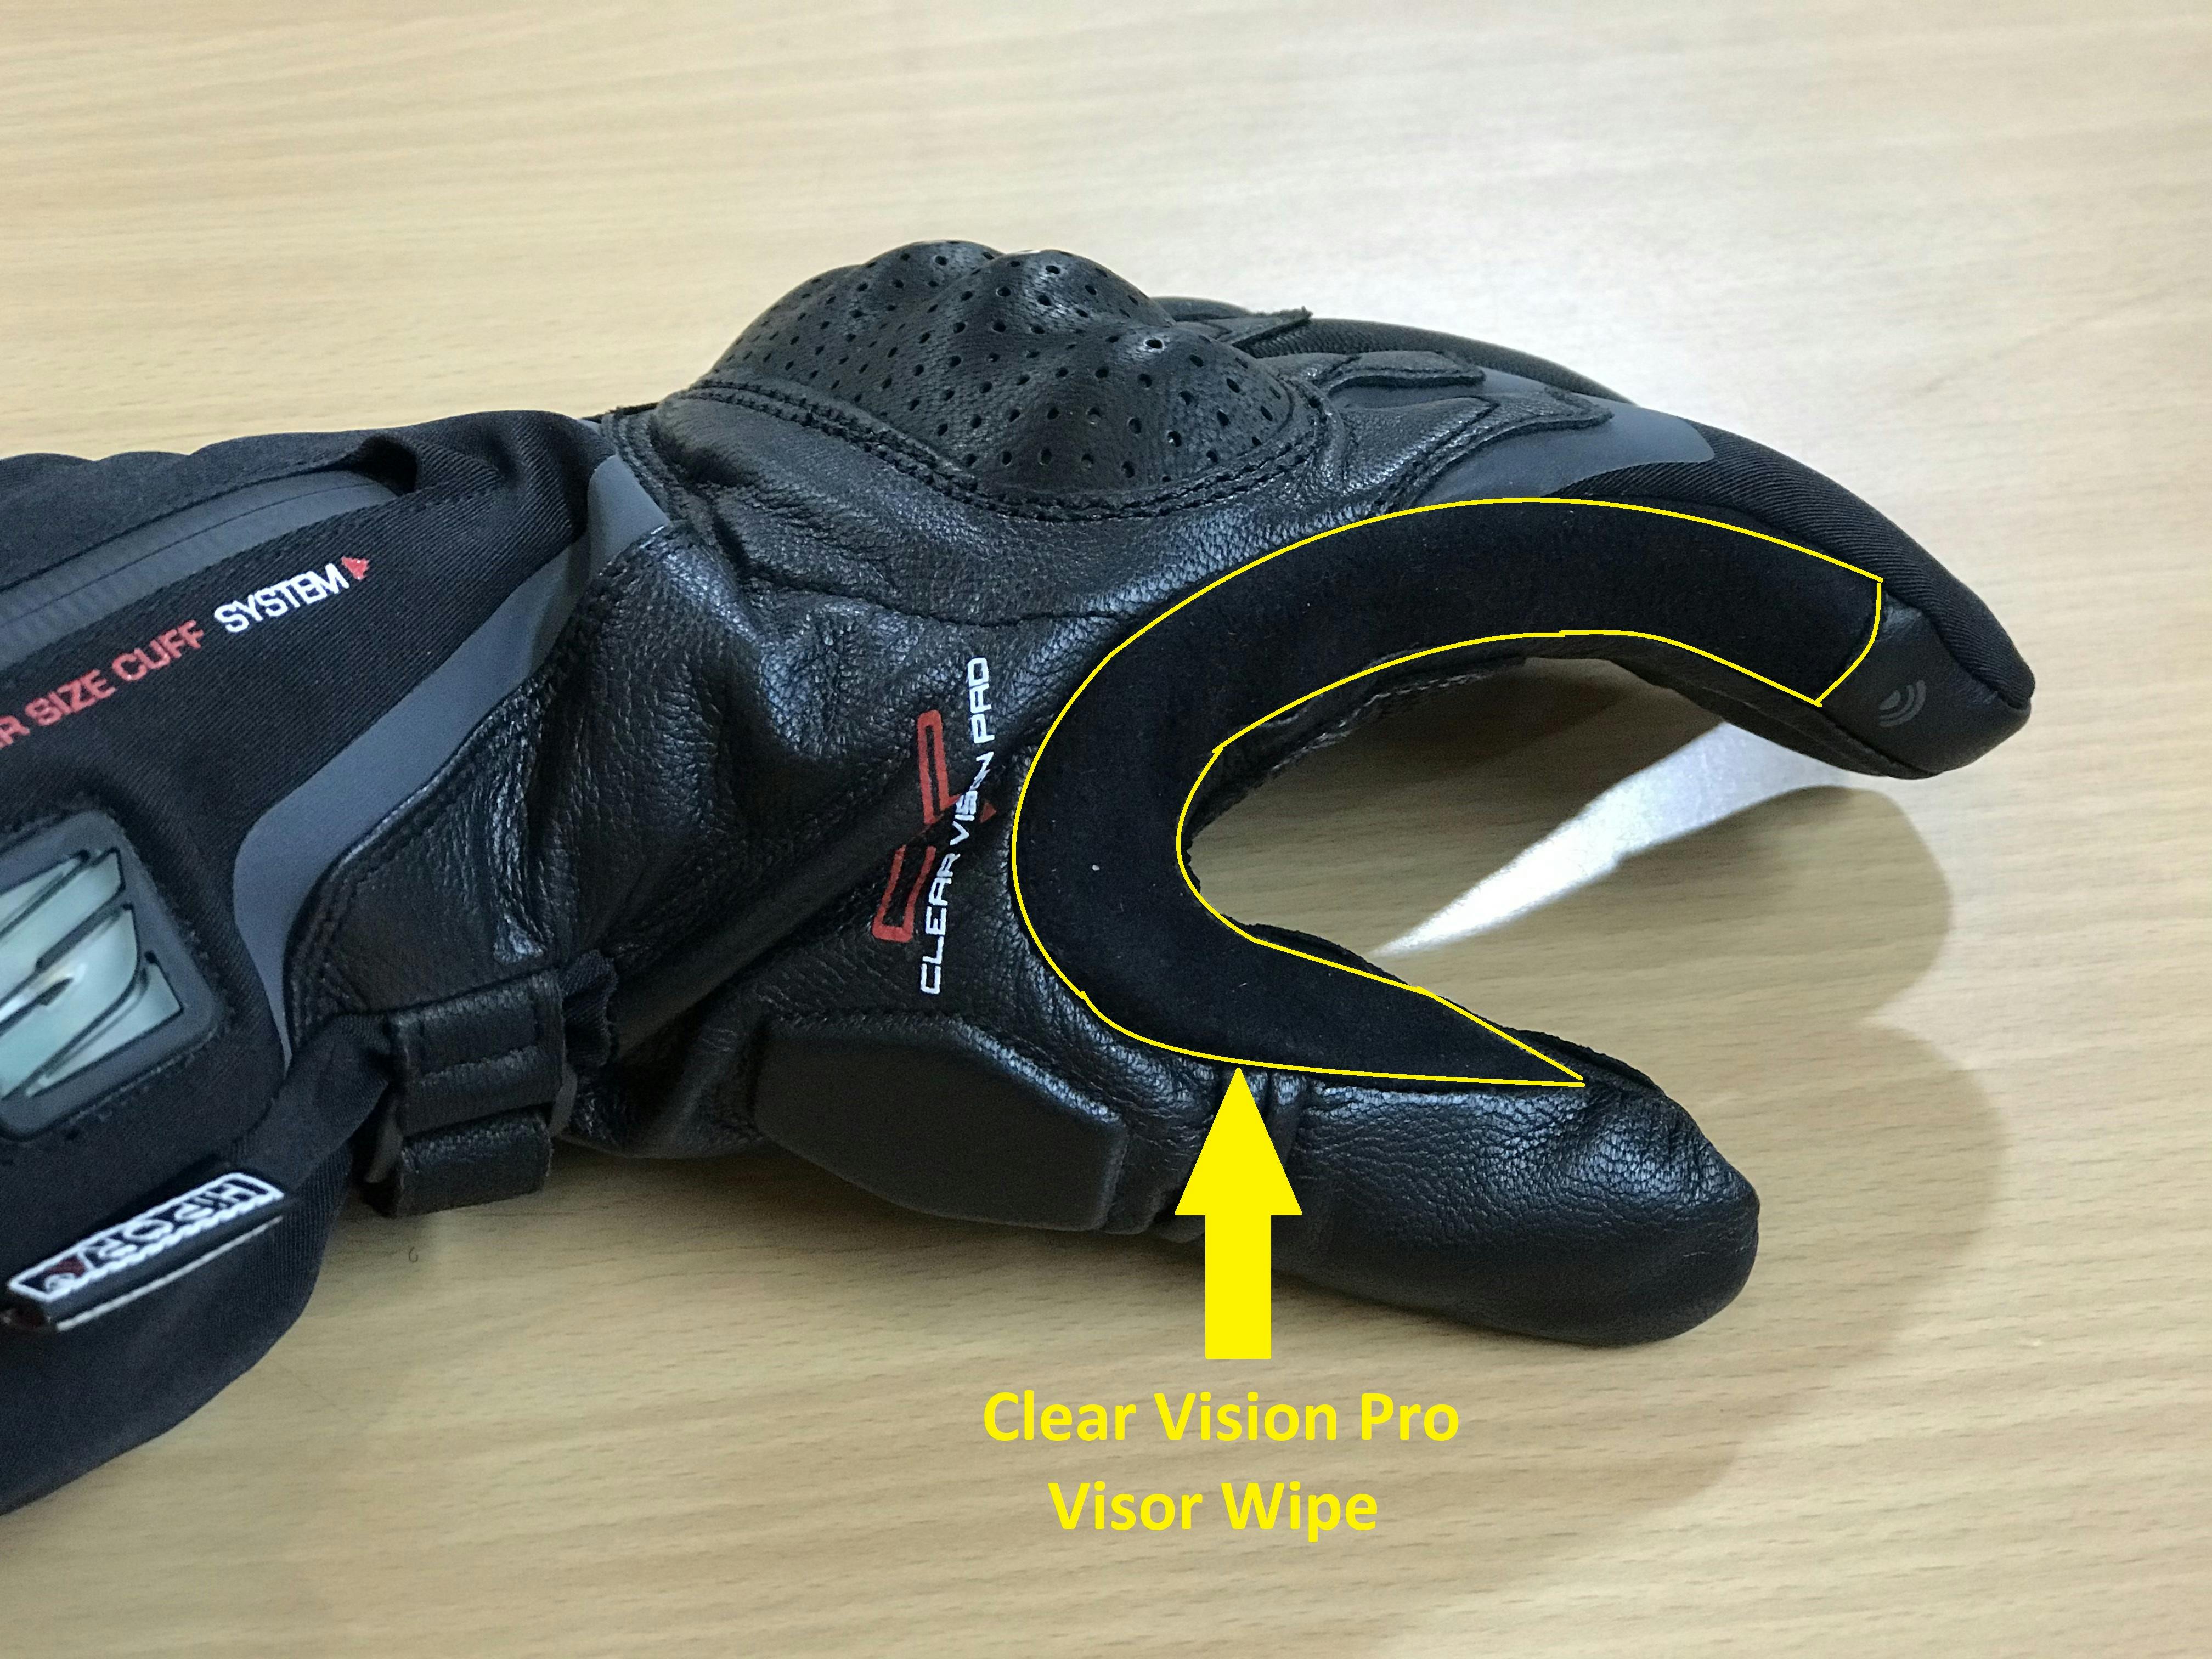 Picture showing the visor wipe on the Five heated glove